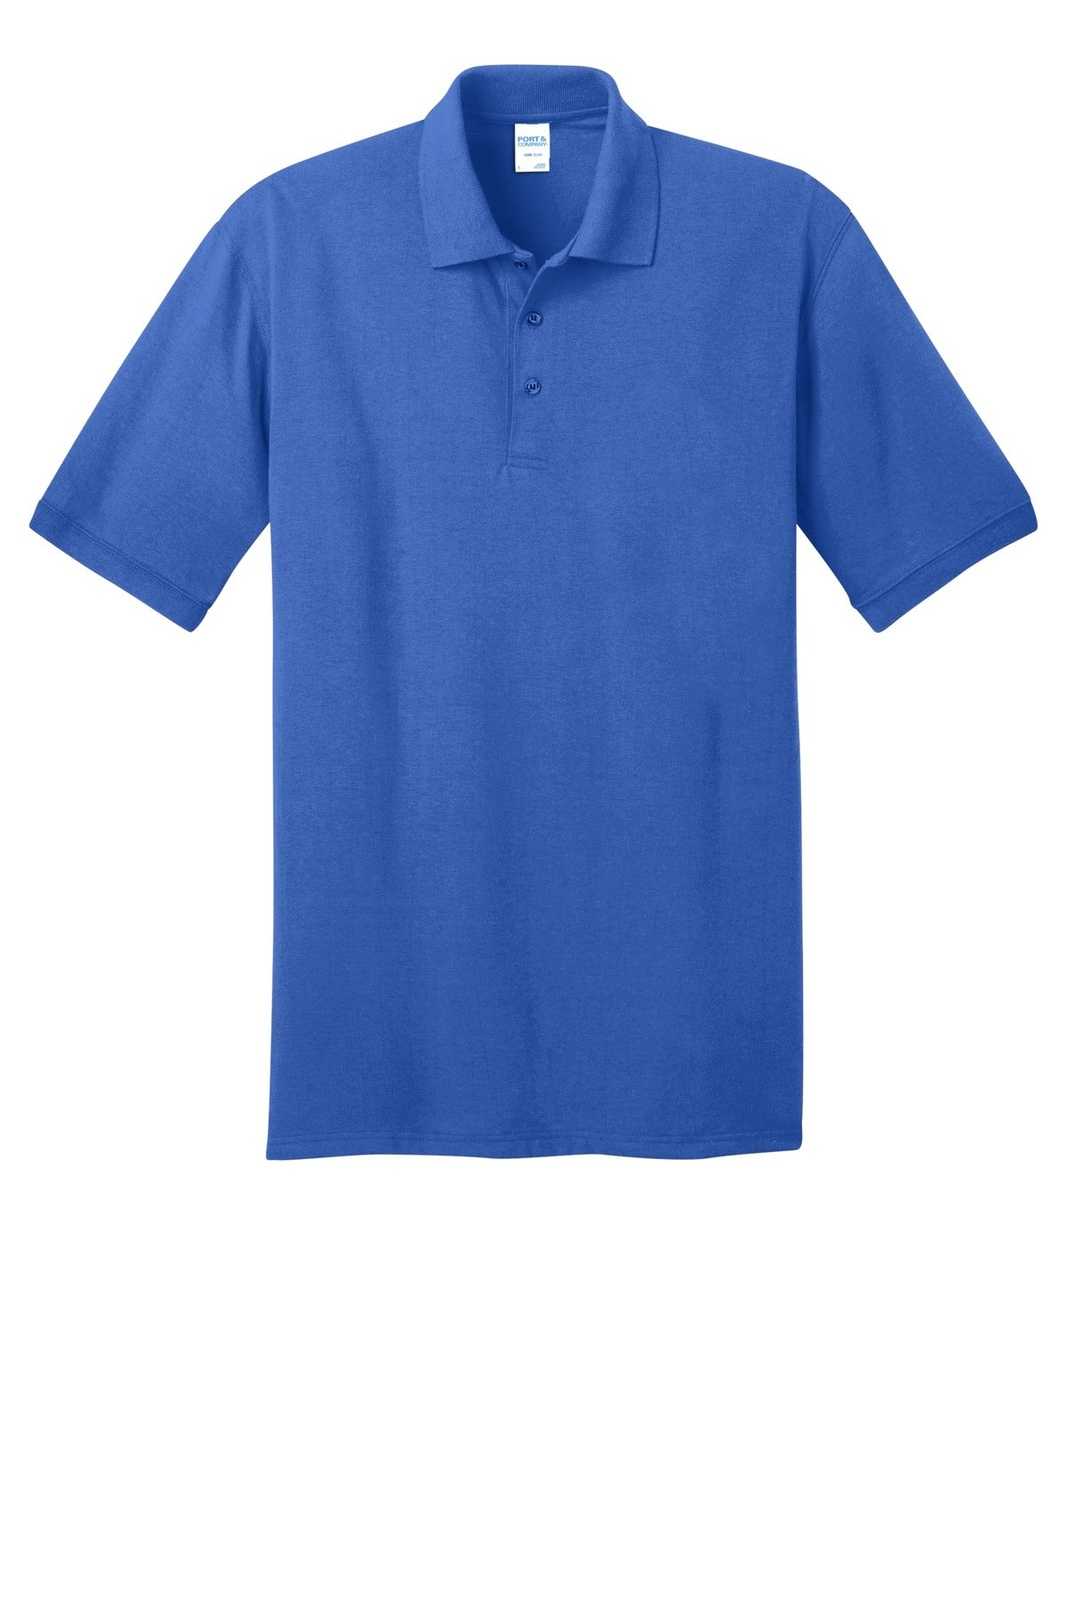 Port & Company KP55T Tall Core Blend Jersey Knit Polo - Royal - HIT a Double - 1